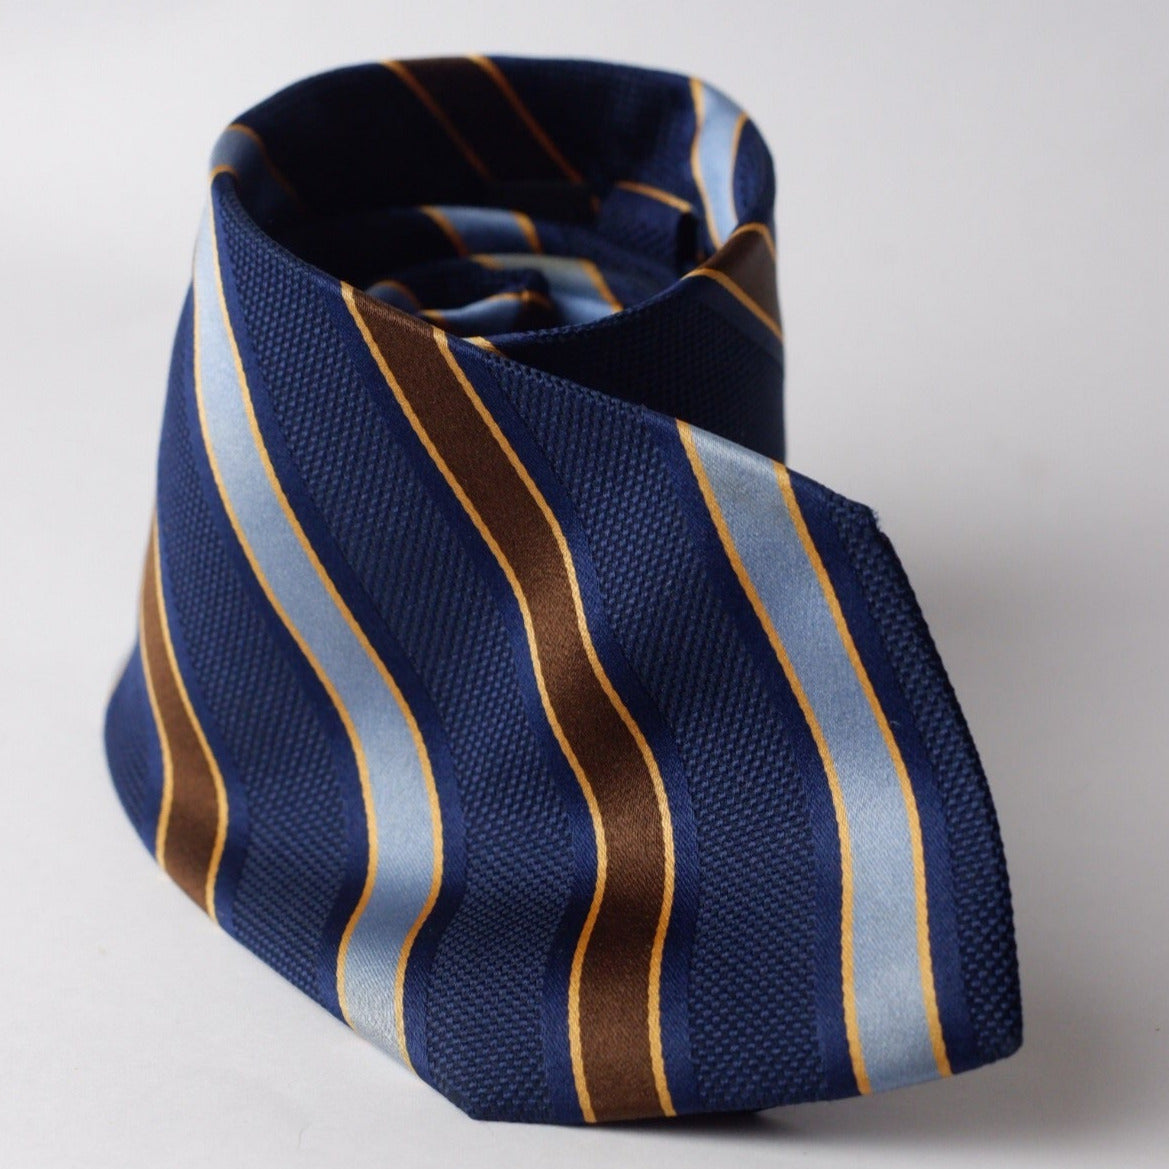 Les Copairs Navy with Brown and Light Blue Stripes Necktie